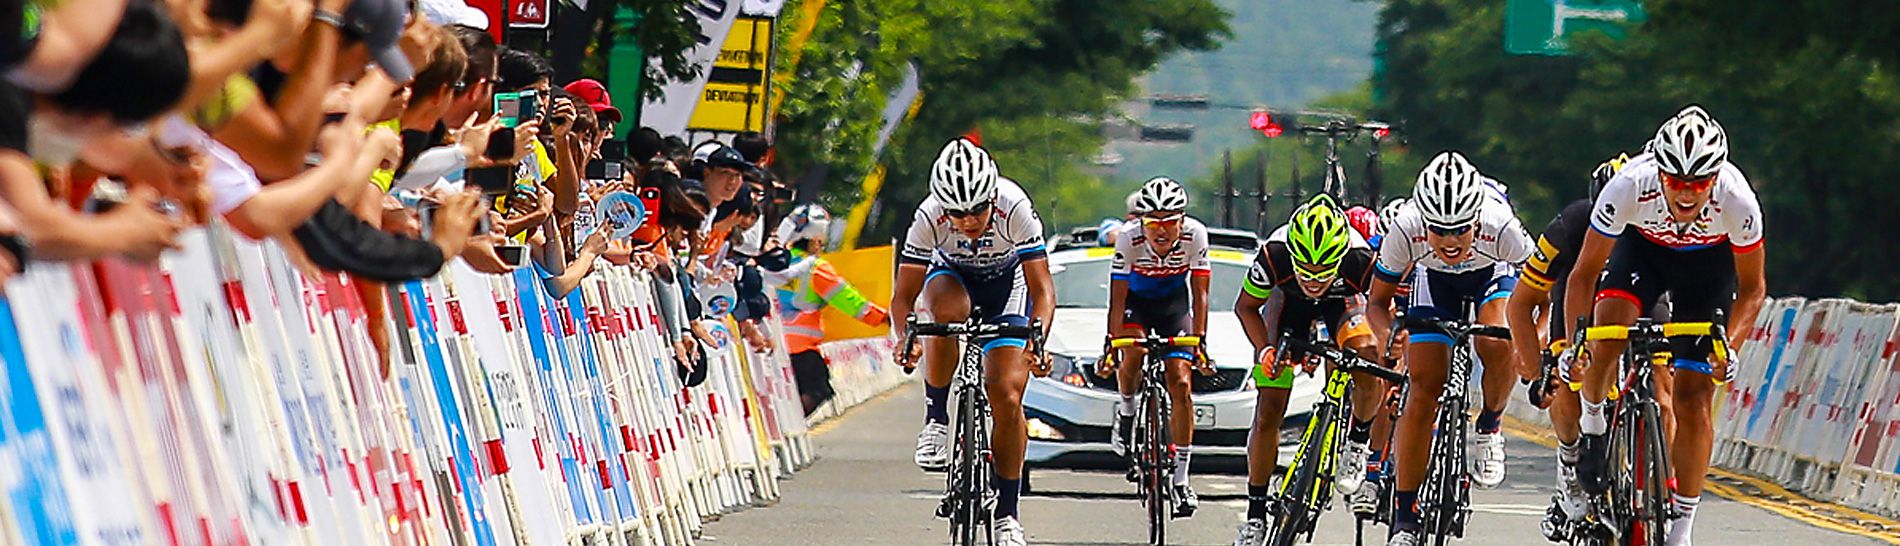 Tour de Korea: riders racing for the stage finish